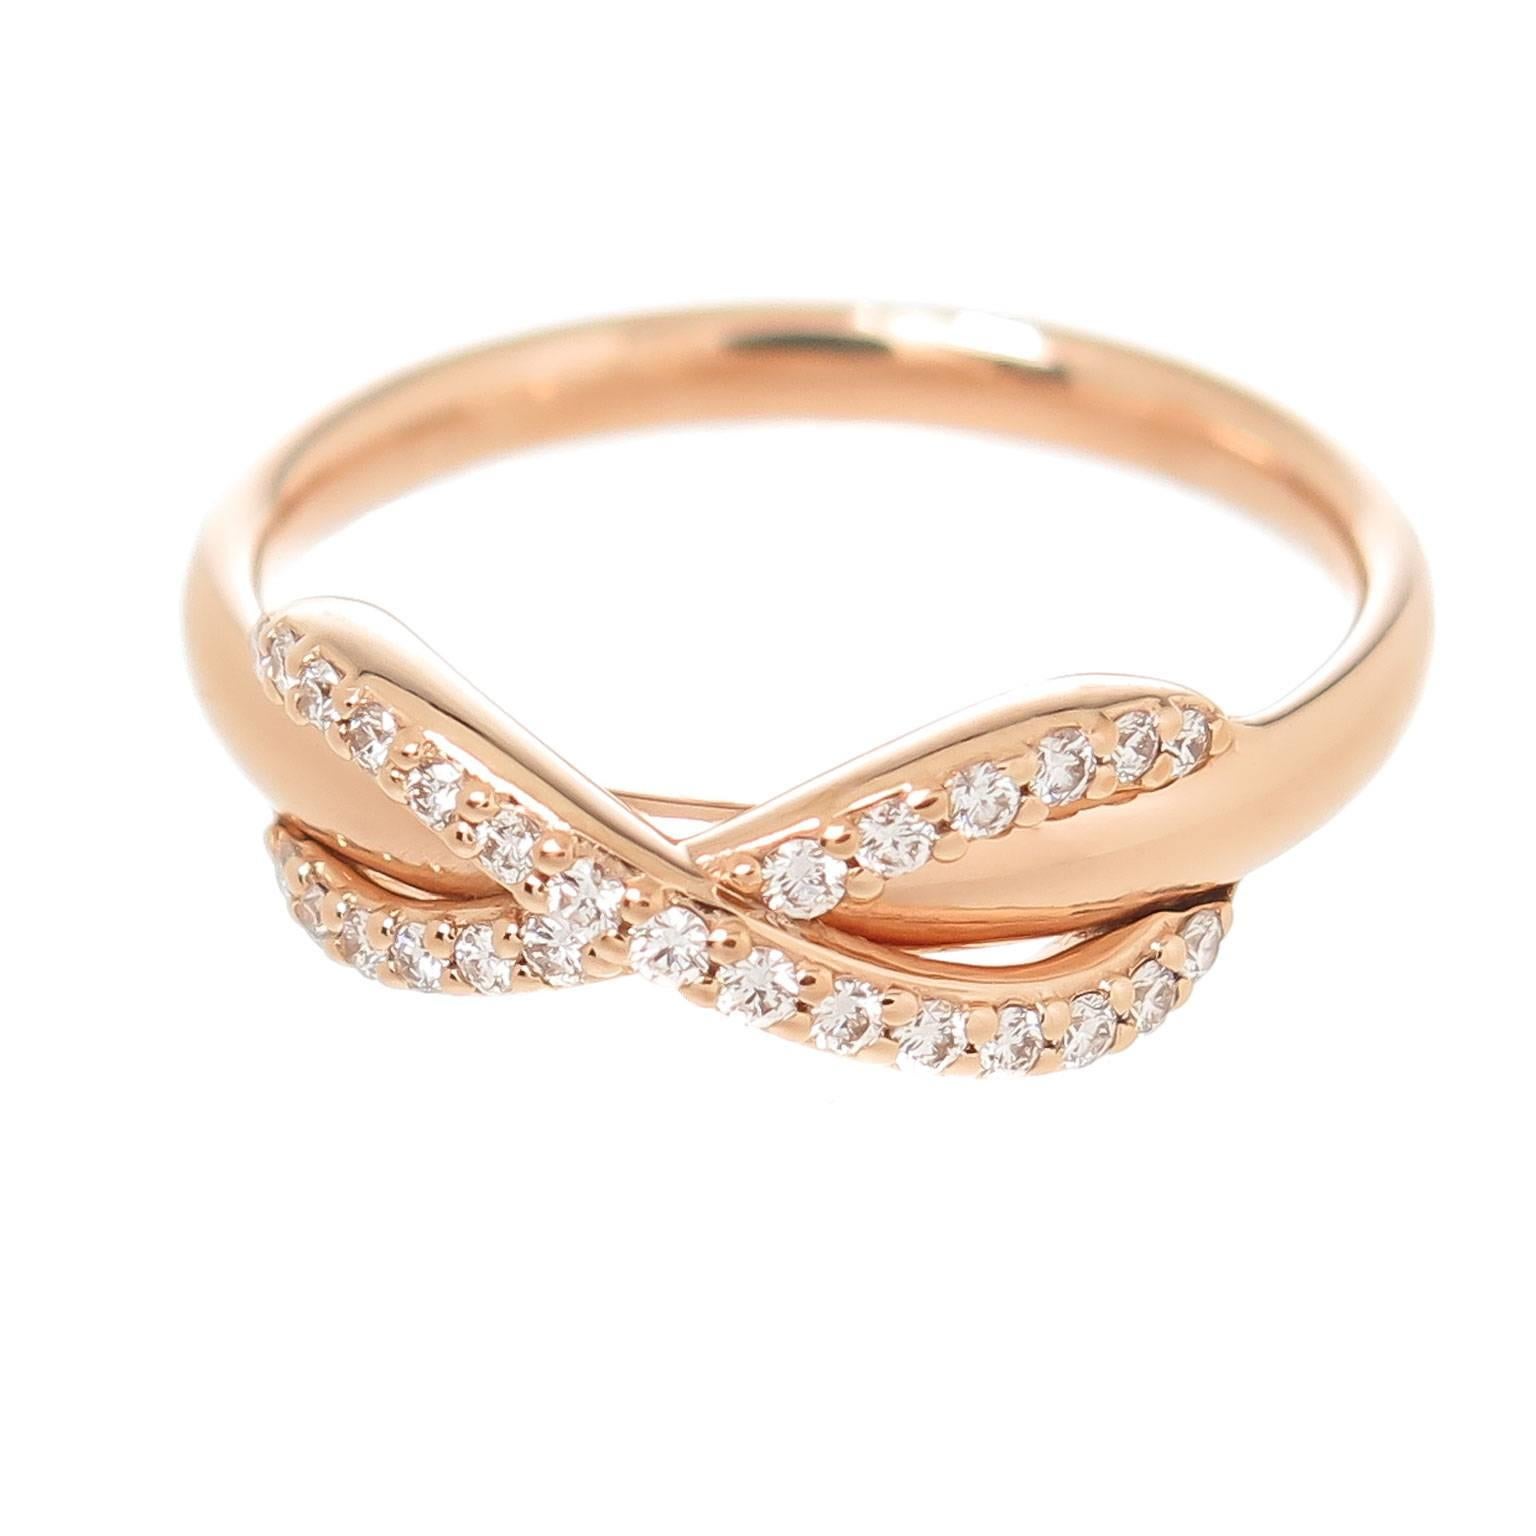 Circa 2015 Tiffany & Company 18K Rose Gold Infinity Collection ring. Set with Round Brilliant cut Diamonds totaling .13 carat. Finger size = 5.  New, unworn in original Tiffany presentation Box. 